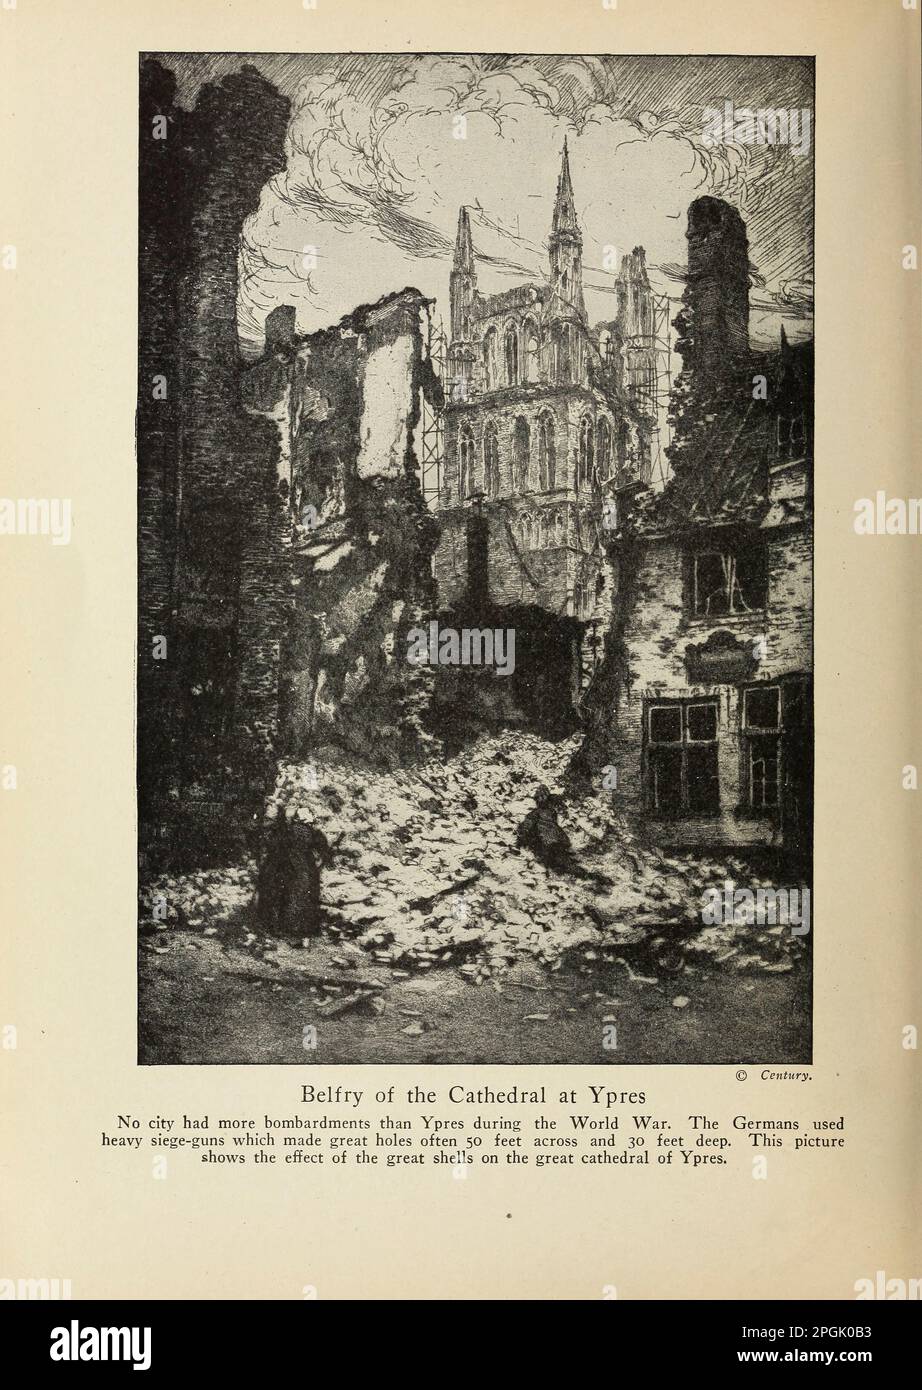 Belfry of the Cathedral at Ypres No city had more bombardments than Ypres during the World War. The Germans used heavy siege-guns which made great holes often 50 feet across and 30 feet deep. This picture shows the effect of the great shells on the great cathedral of Ypres from the book ' Deeds of heroism and bravery : the book of heroes and personal daring ' by Elwyn Alfred Barron and Rupert Hughes,  Publication Date 1920 Publisher New York : Harper & Brothers Publishers Stock Photo